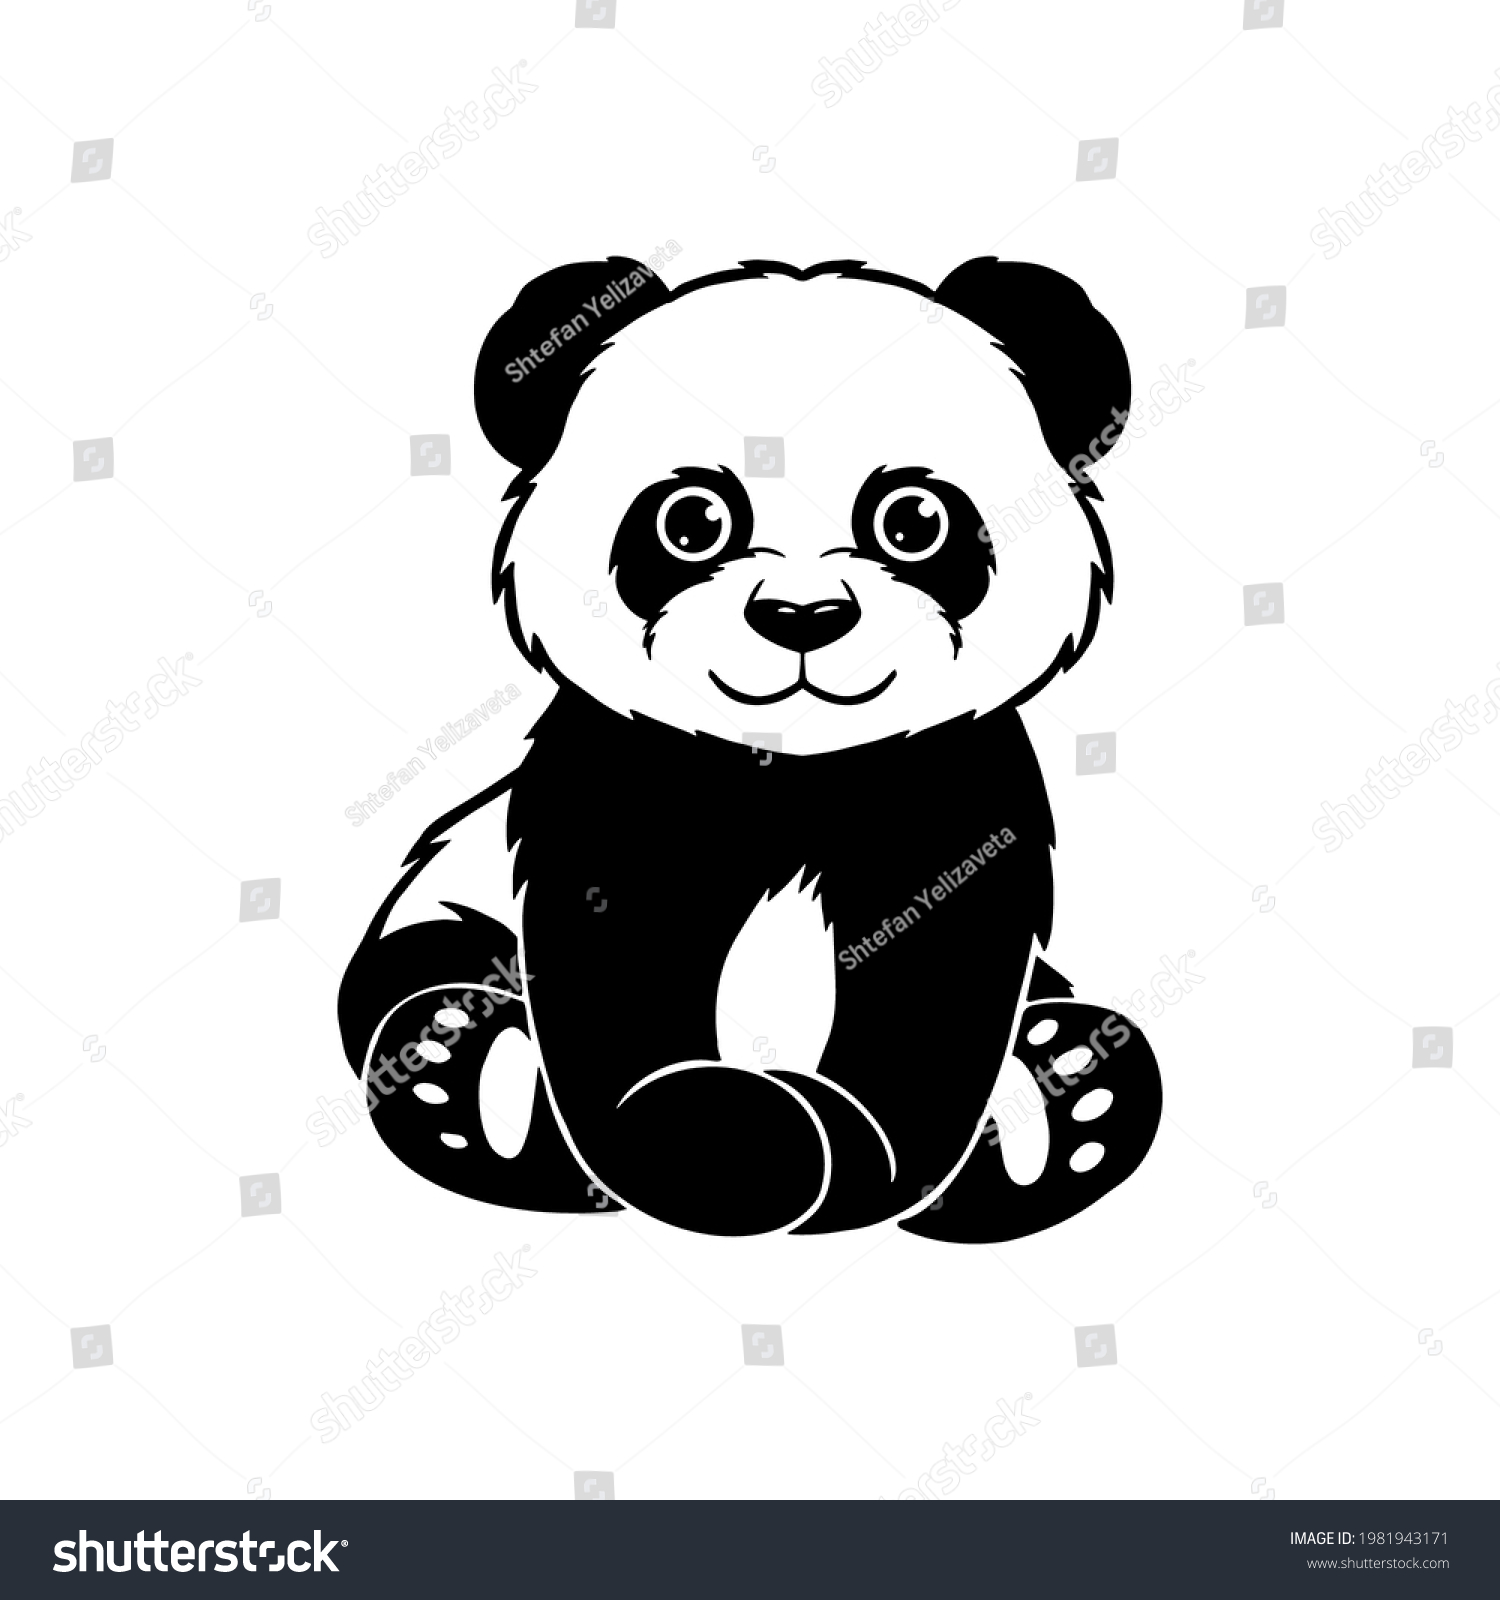 SVG of Little cute panda sitting. File for printing and cutting. Vector panda illustration in black and white color svg